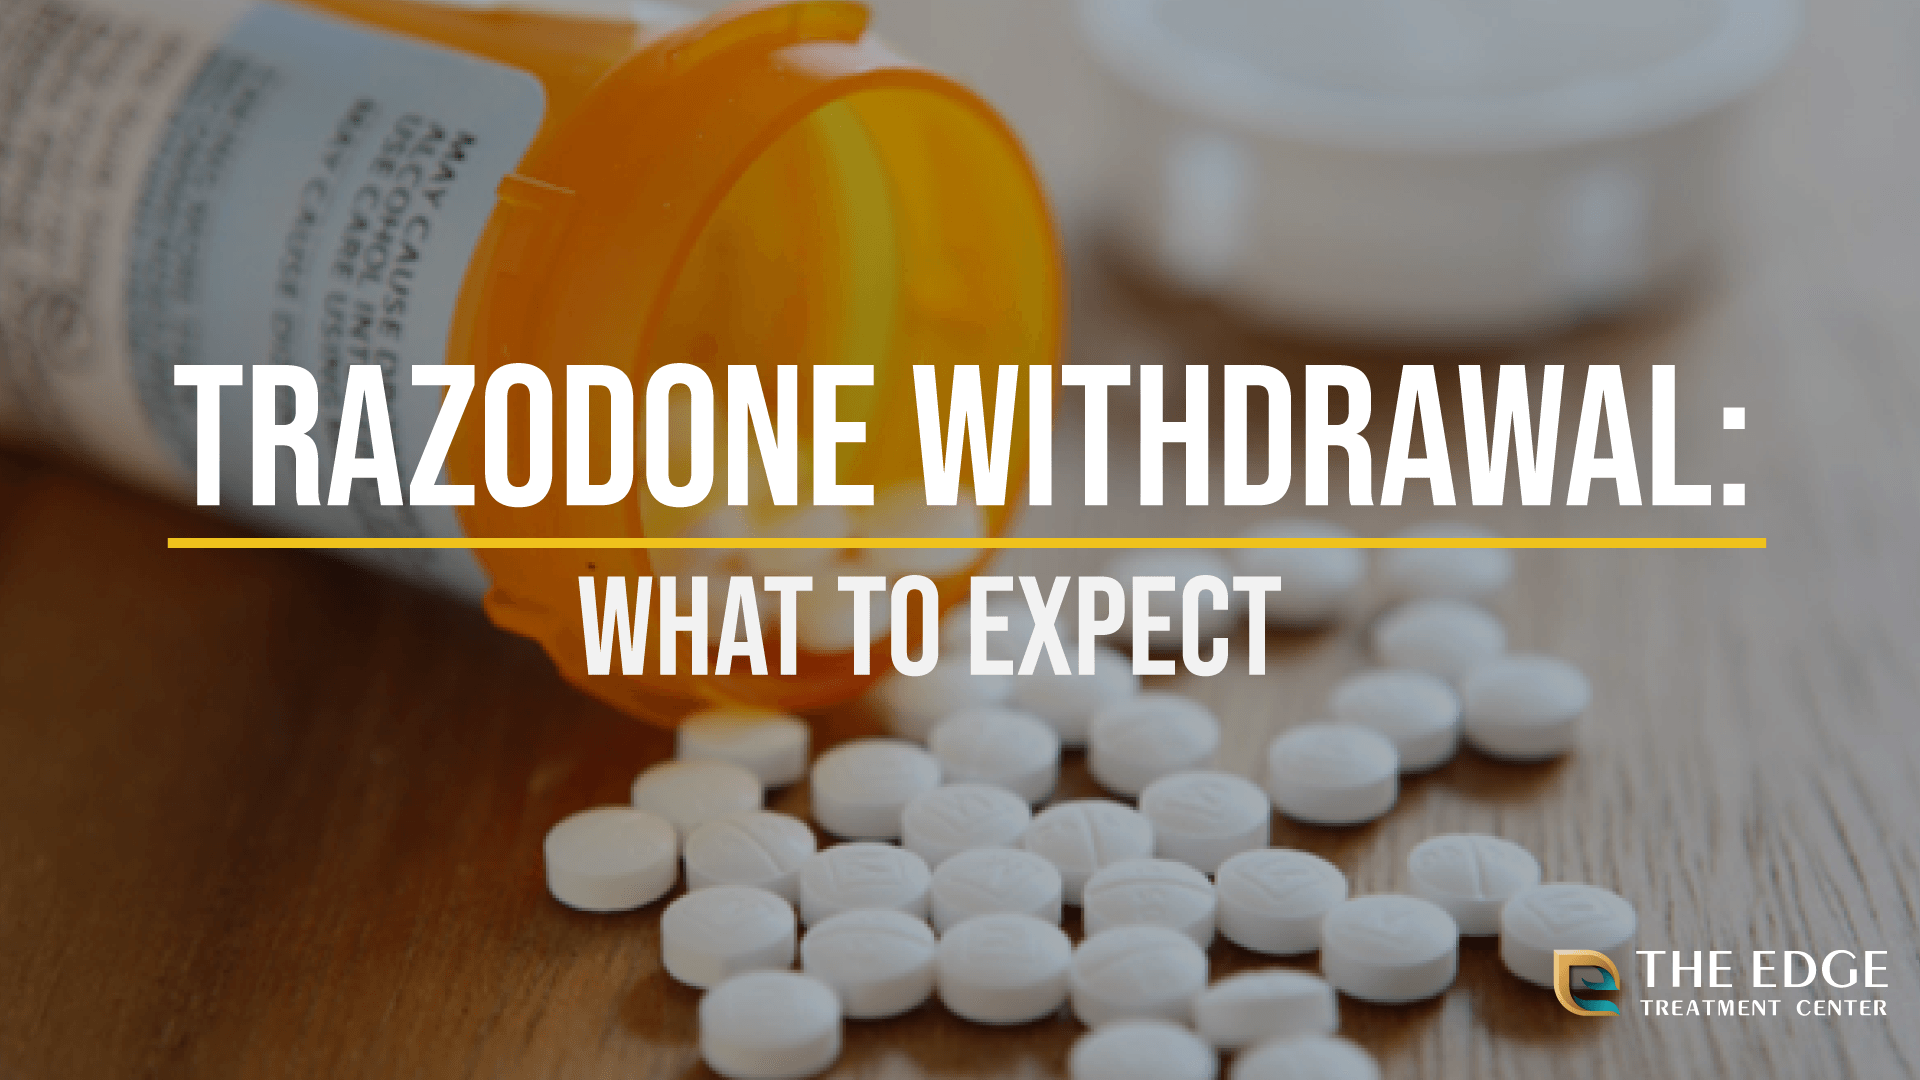 What is Trazodone Withdrawal Like?